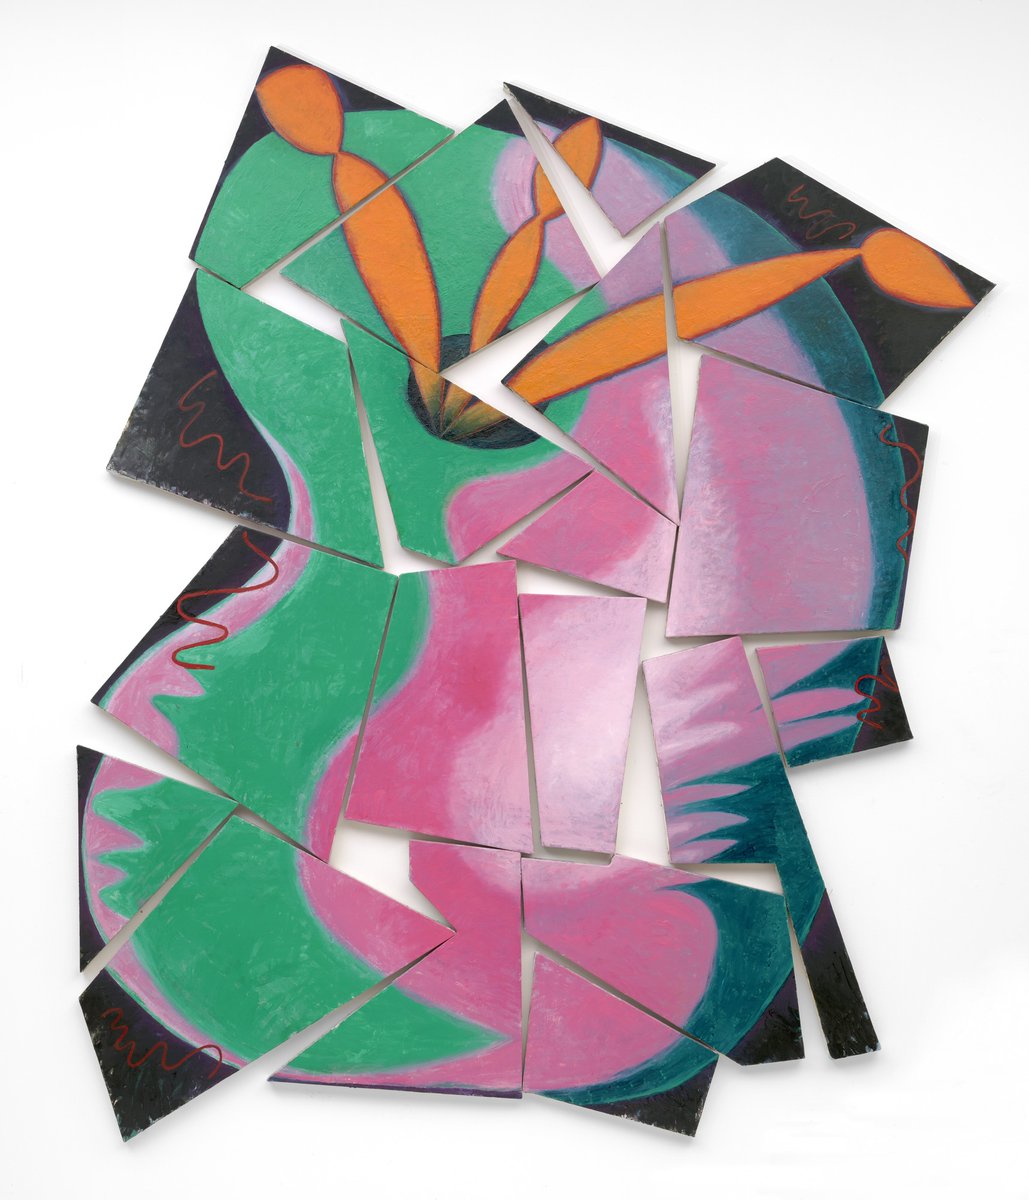 Works by American artist Elizabeth Murray, 1980s-90s, known for her dynamic, sculptural, assembled canvases employing biomorphic, cartoonish forms